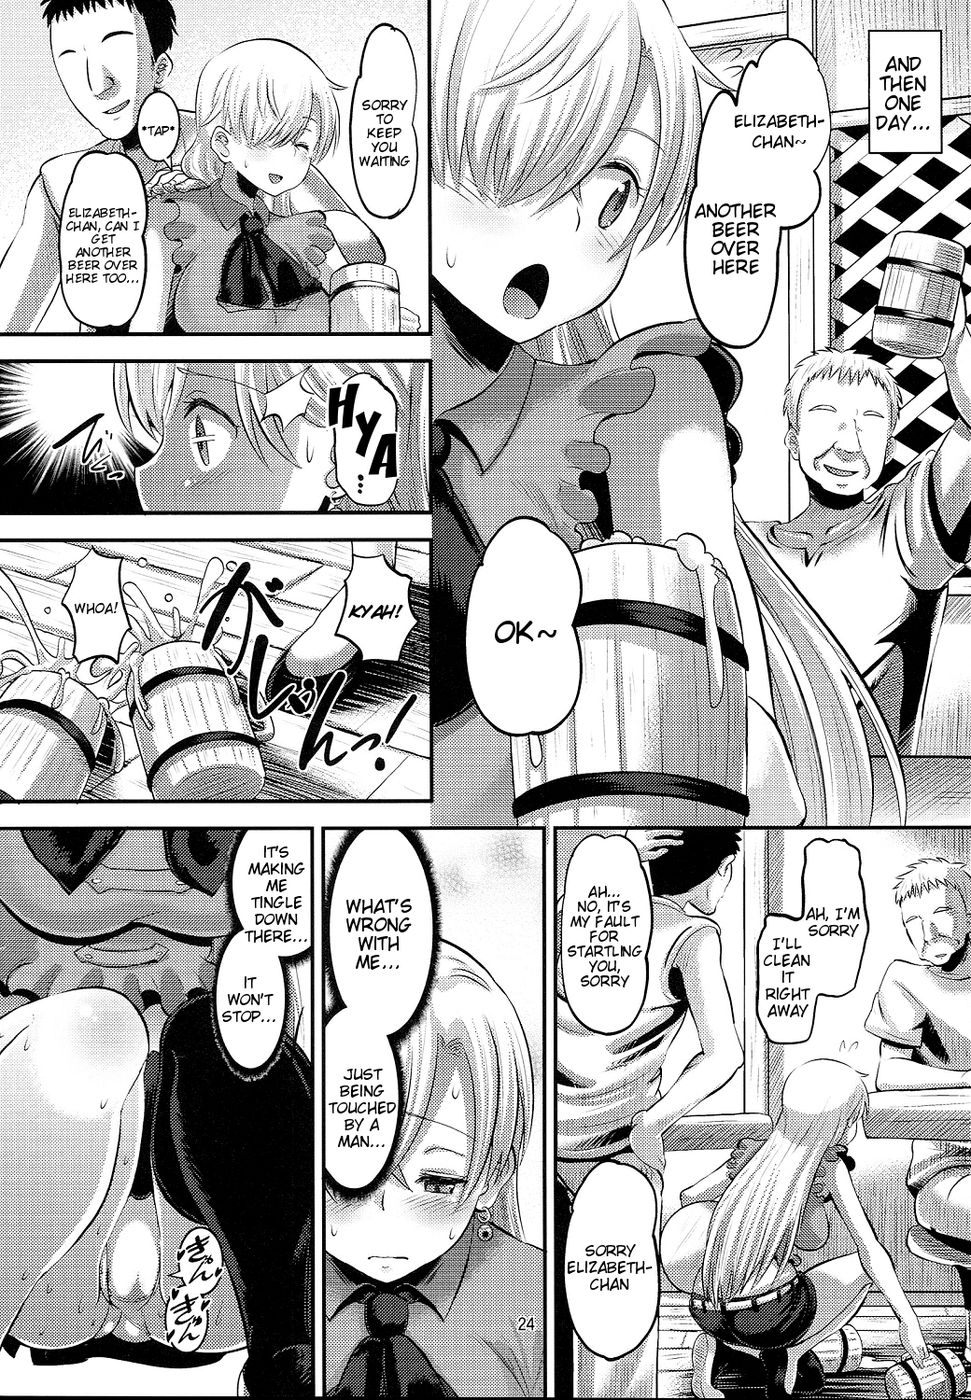 Elizabeth the Deceived Princess-Read-Hentai Manga Hentai Comic - Page: 23 -  Online porn video at mobile